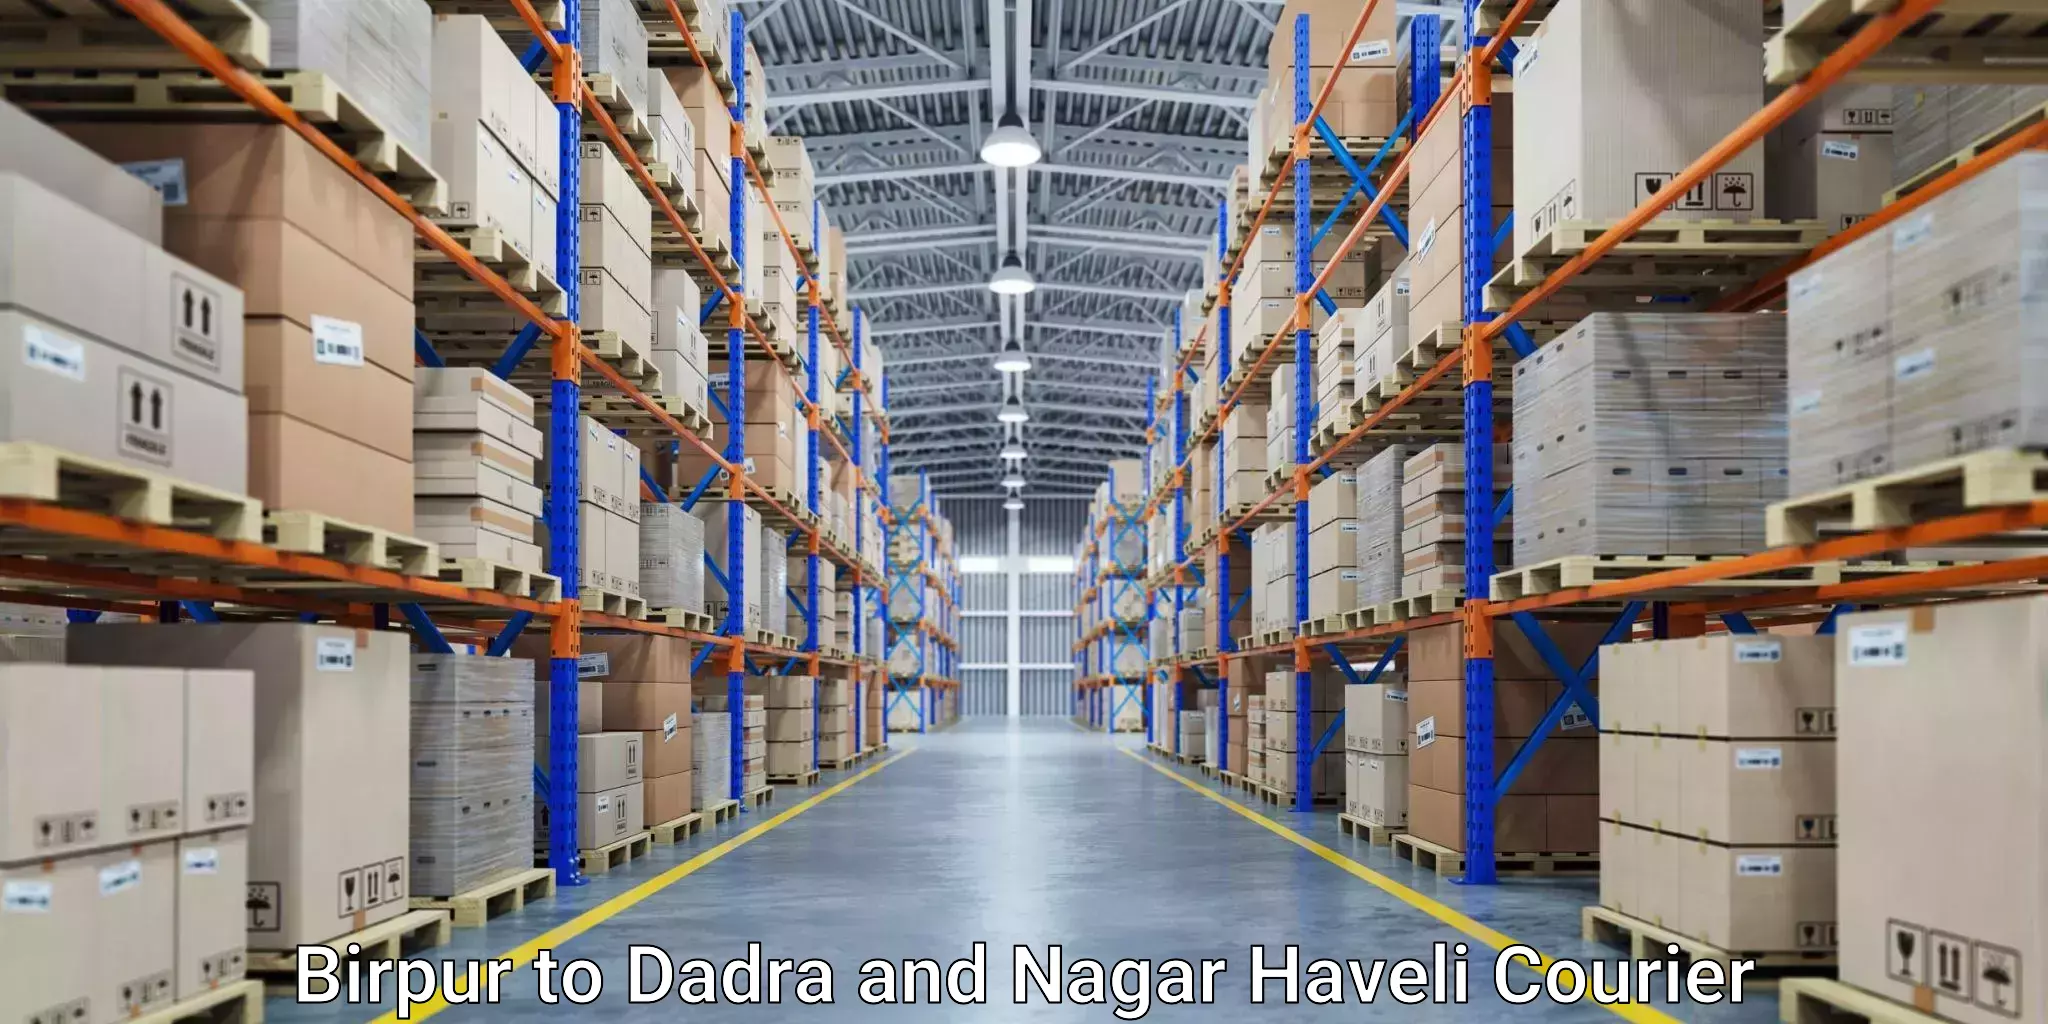 Sustainable shipping practices Birpur to Dadra and Nagar Haveli